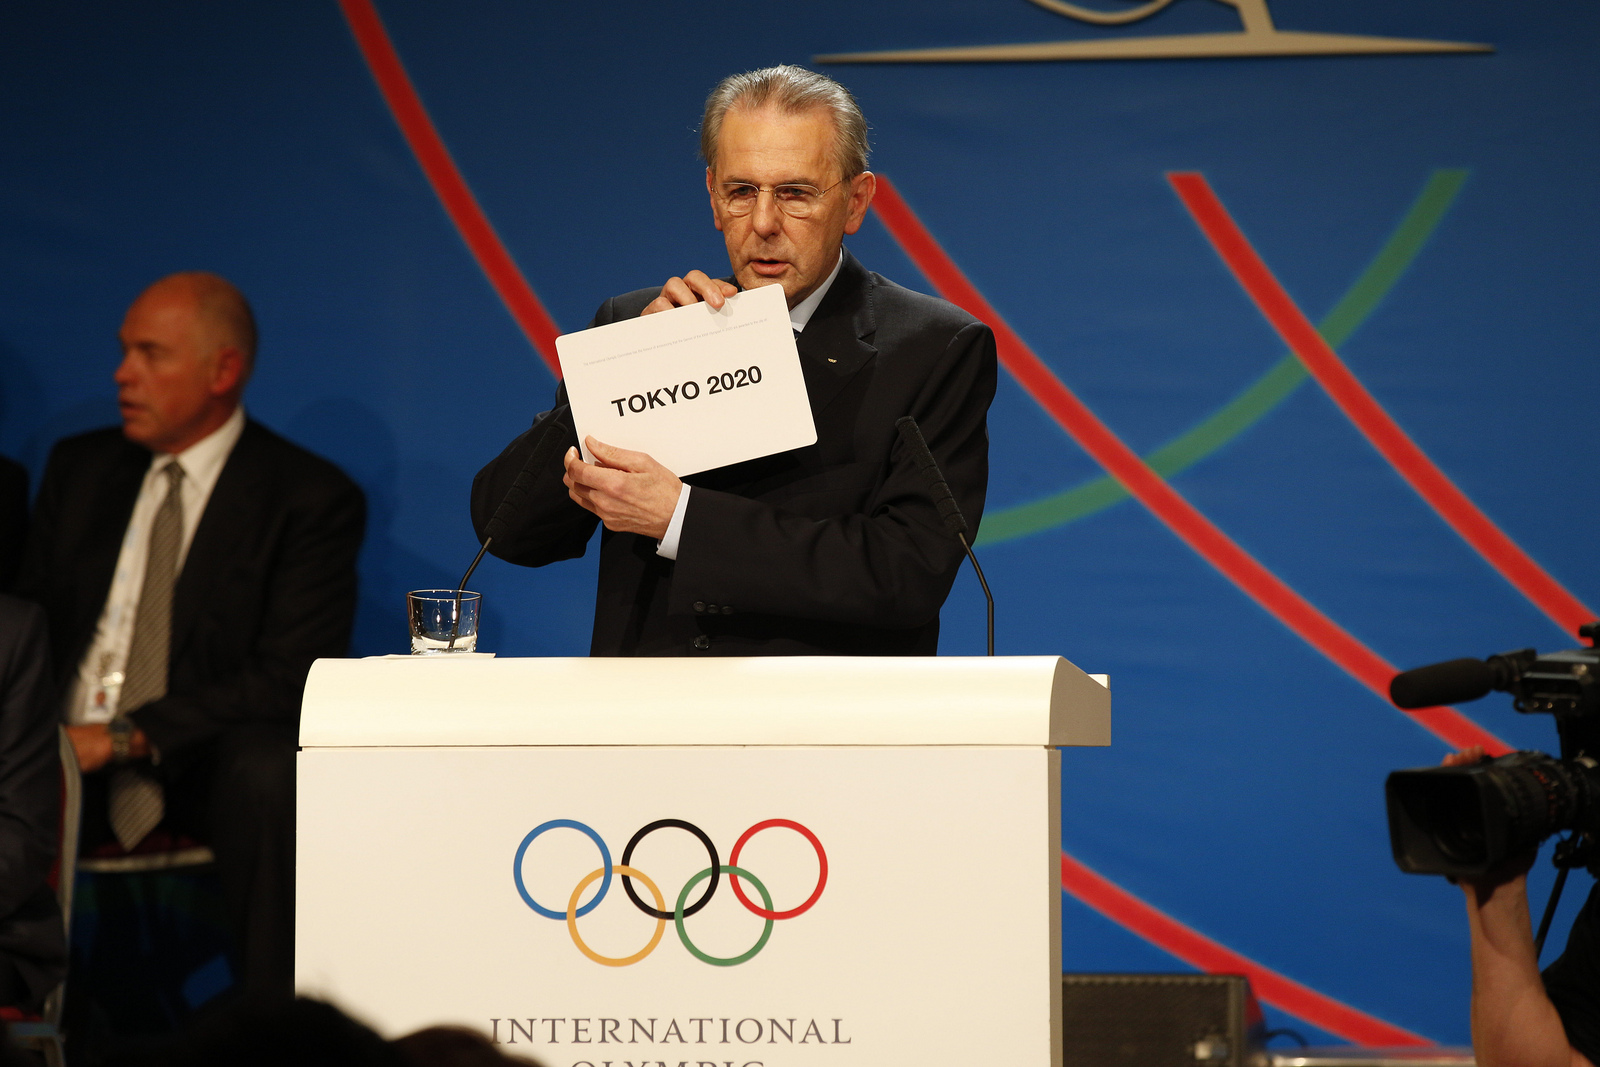 Jacques Rogge announces Tokyo as the host of the 2020 Summer Olympics